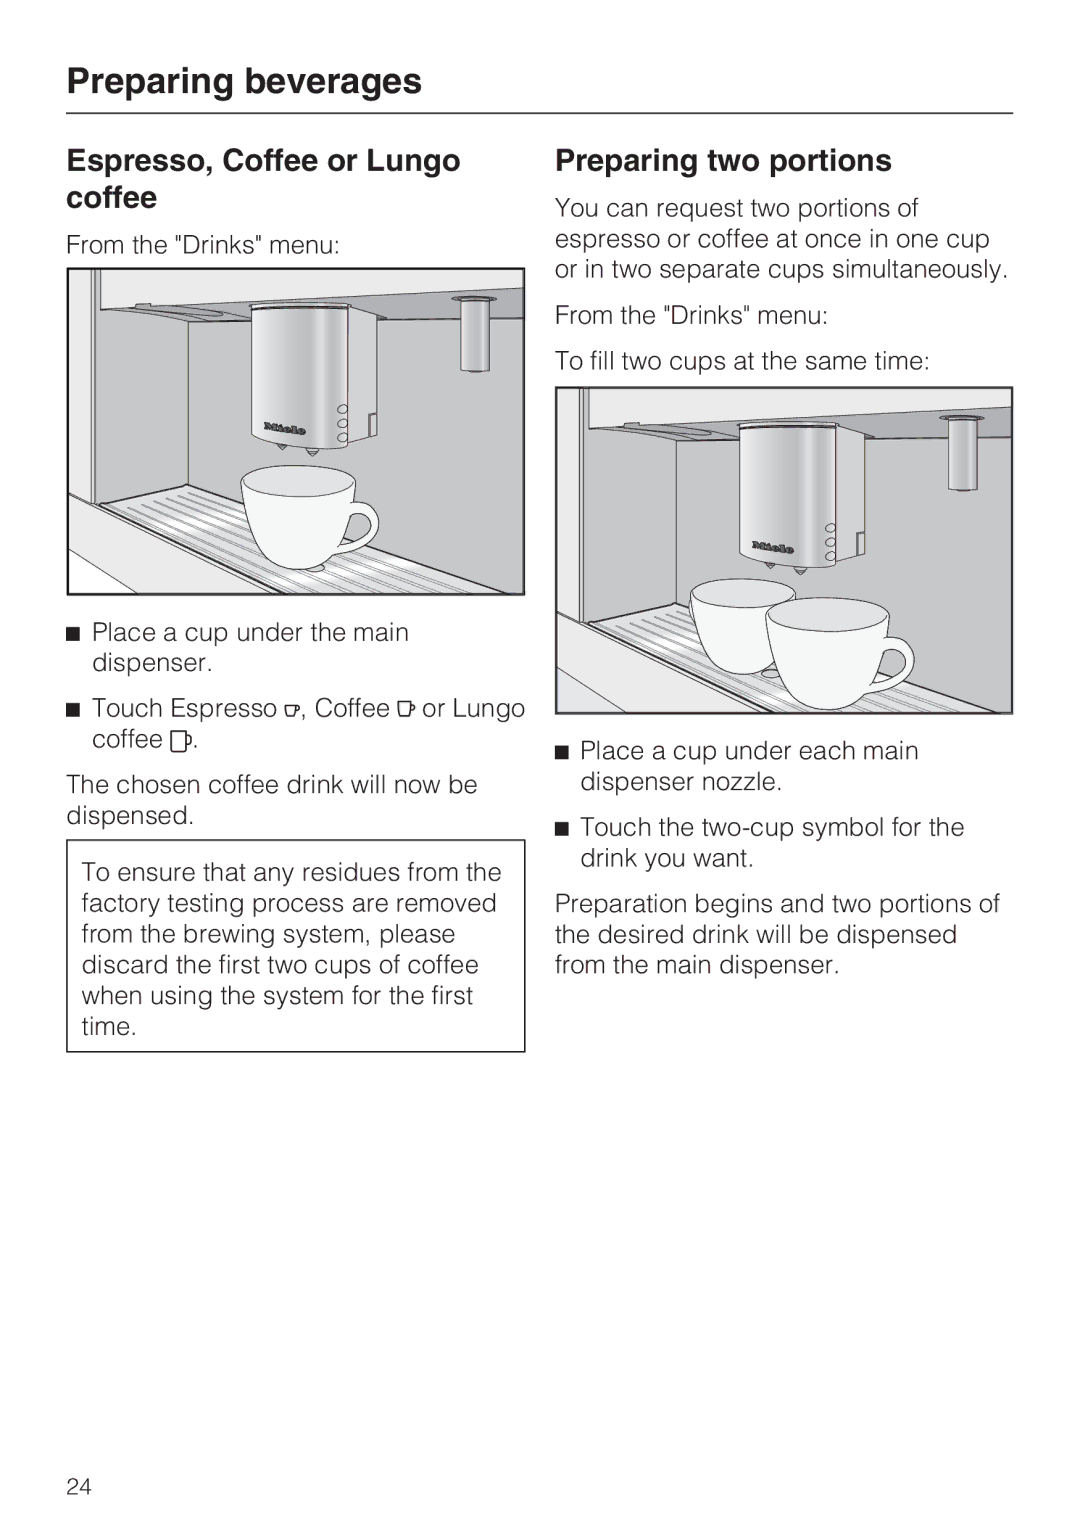 Miele 09 741 681 installation instructions Preparing beverages, Espresso, Coffee or Lungo coffee, Preparing two portions 